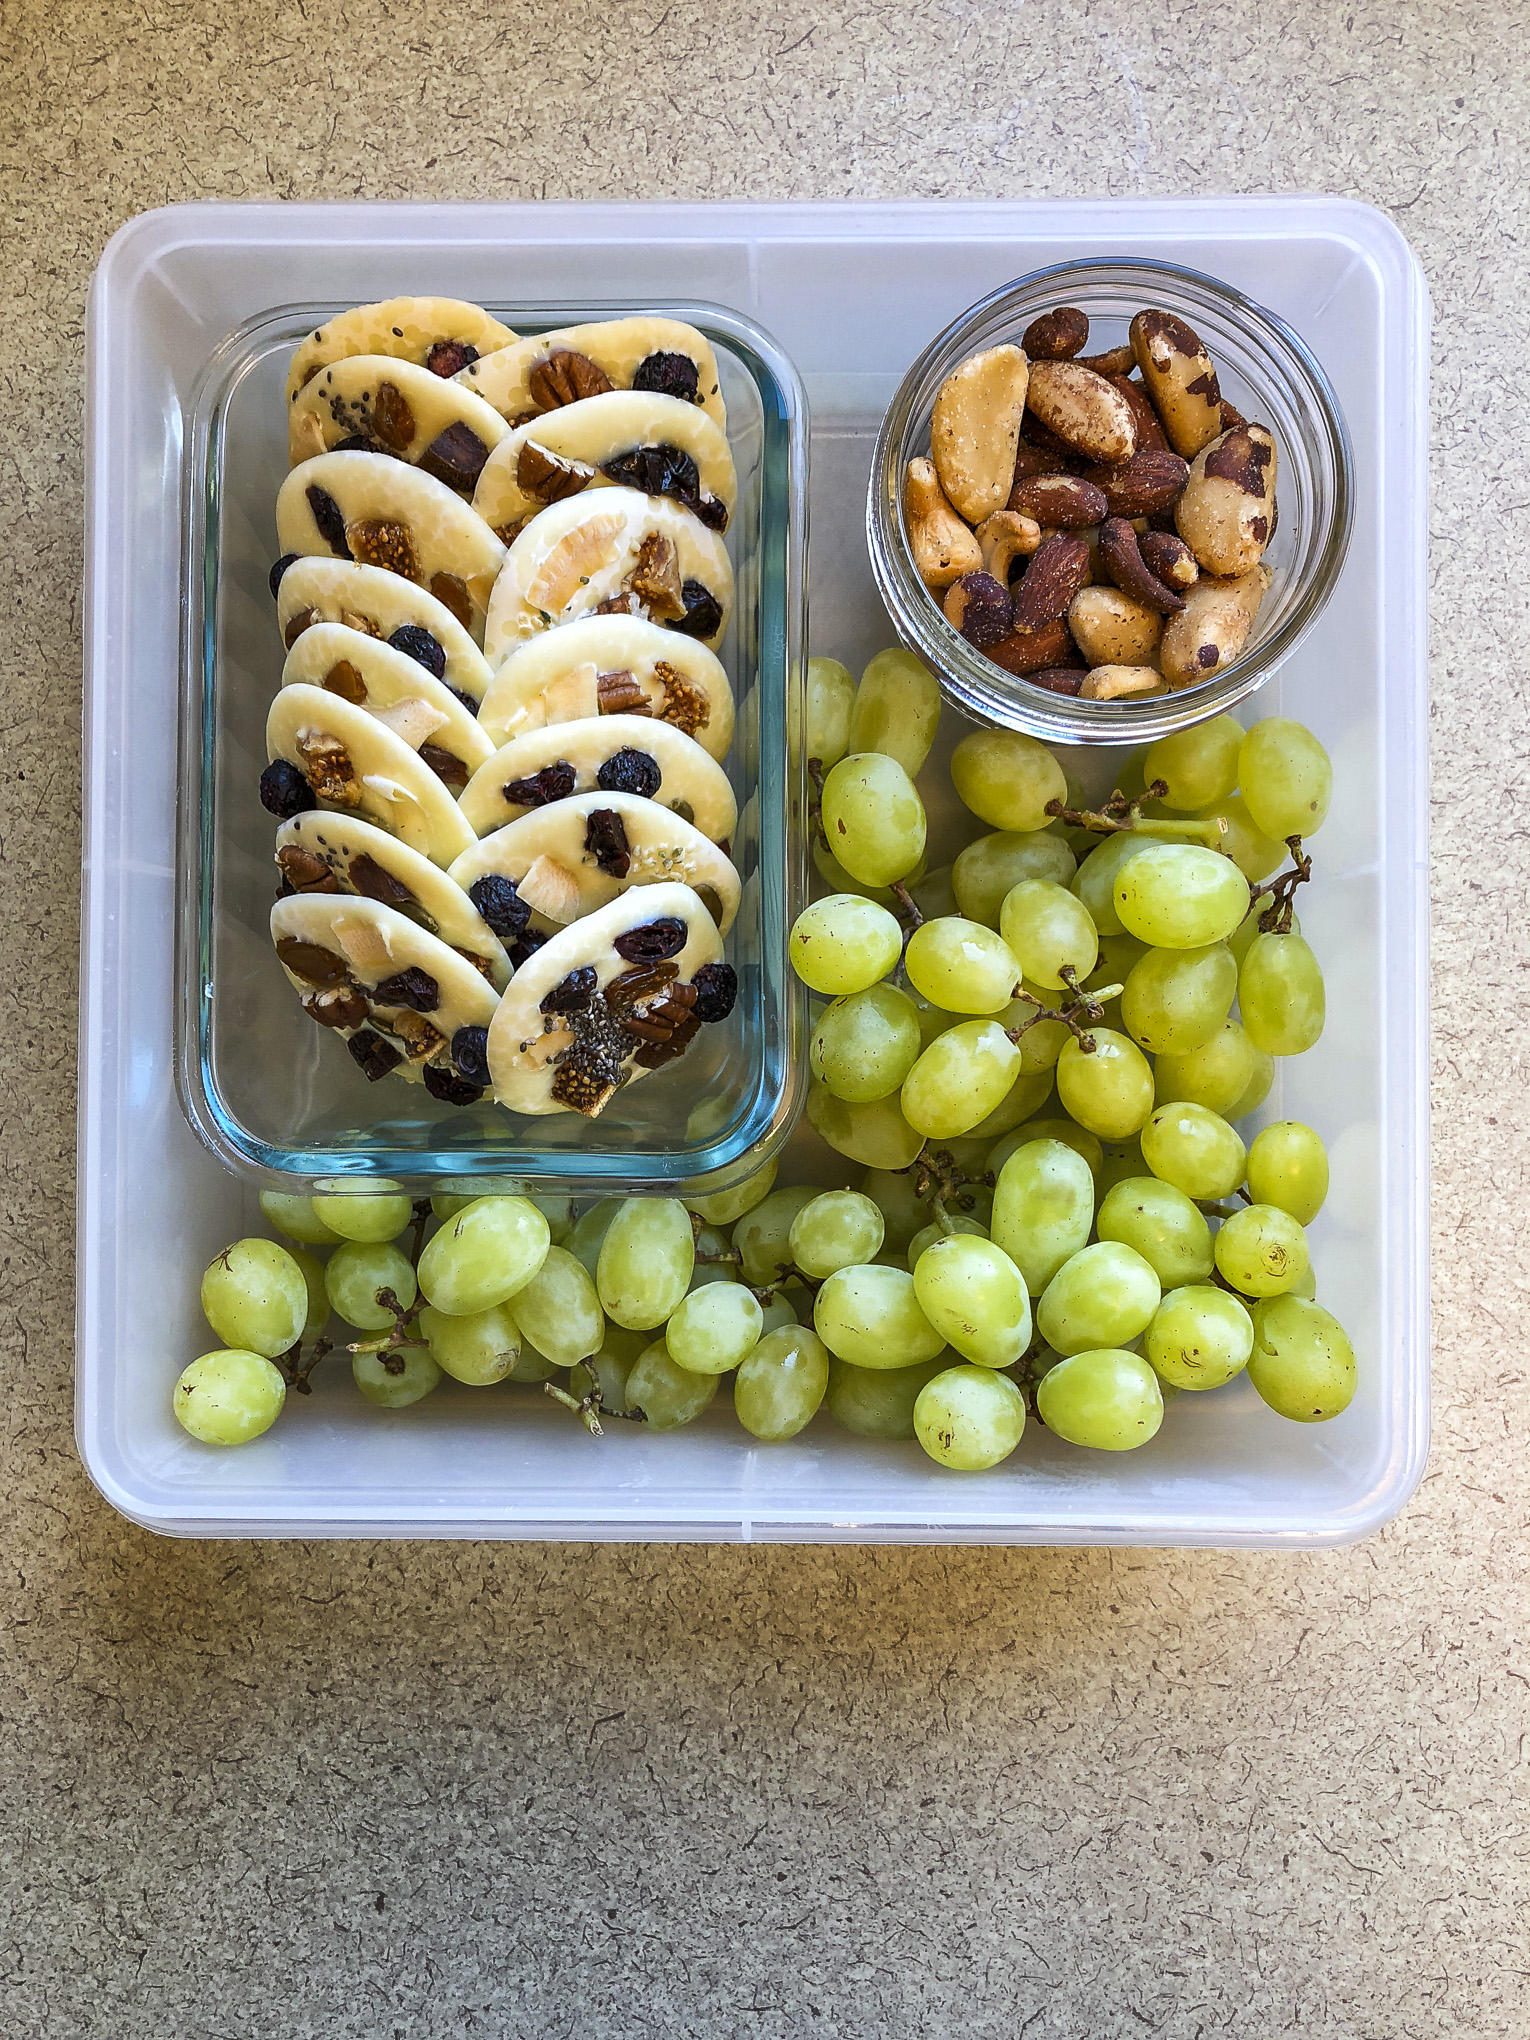 Tupperware filled with white chocolate, nuts and green grapes